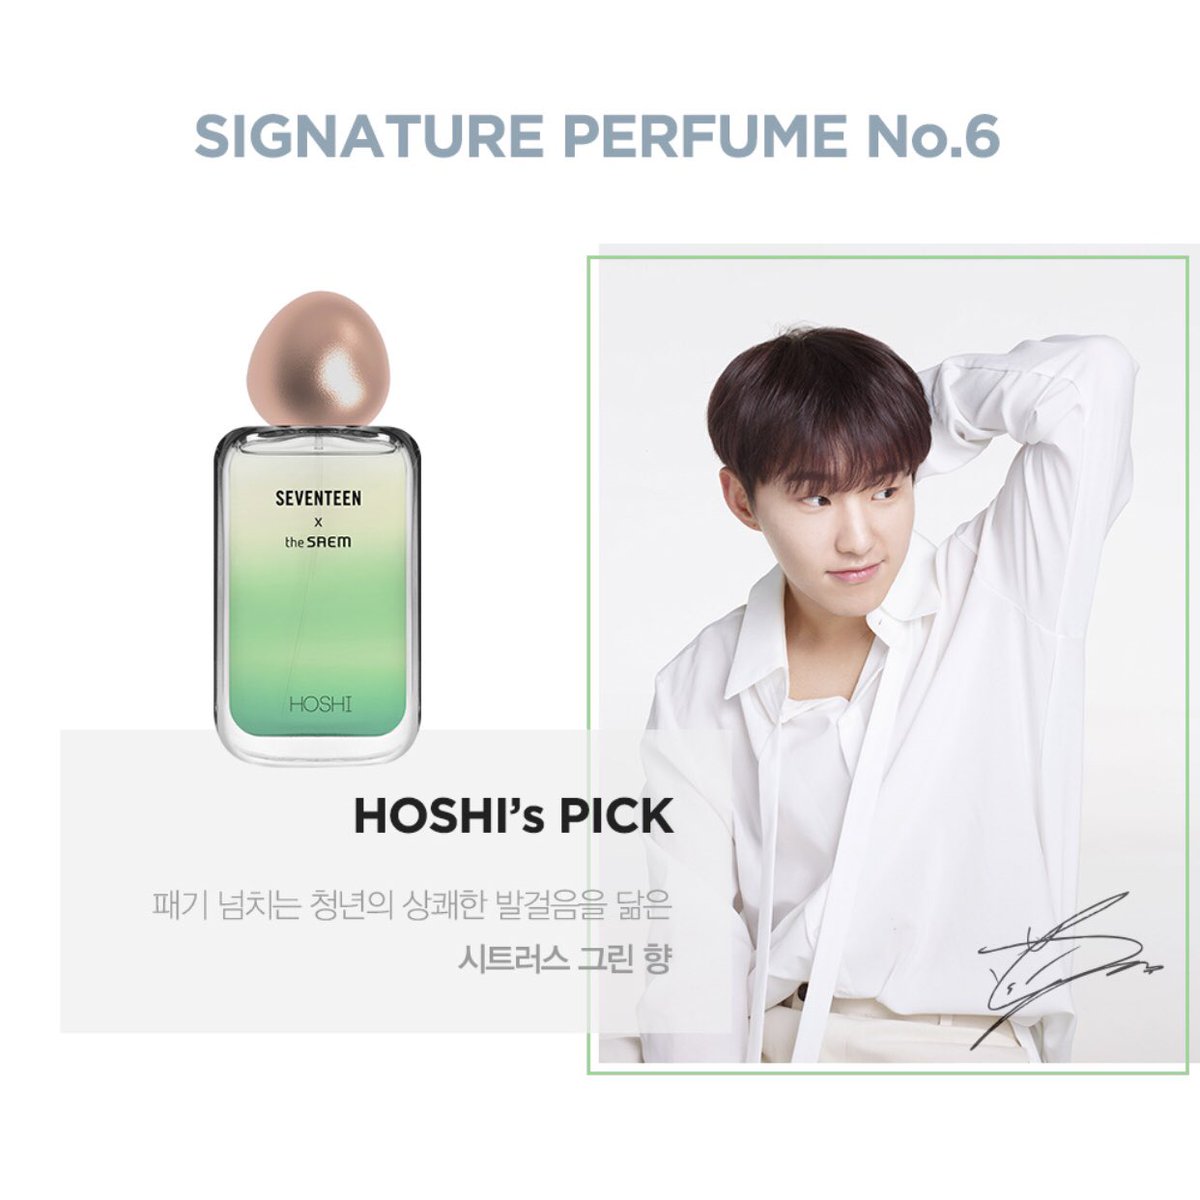 They both choose citrus floral green as their scent  the perfume color is also similar. Soonhoon can't be more obvious. I believe they planned this beforehand!!